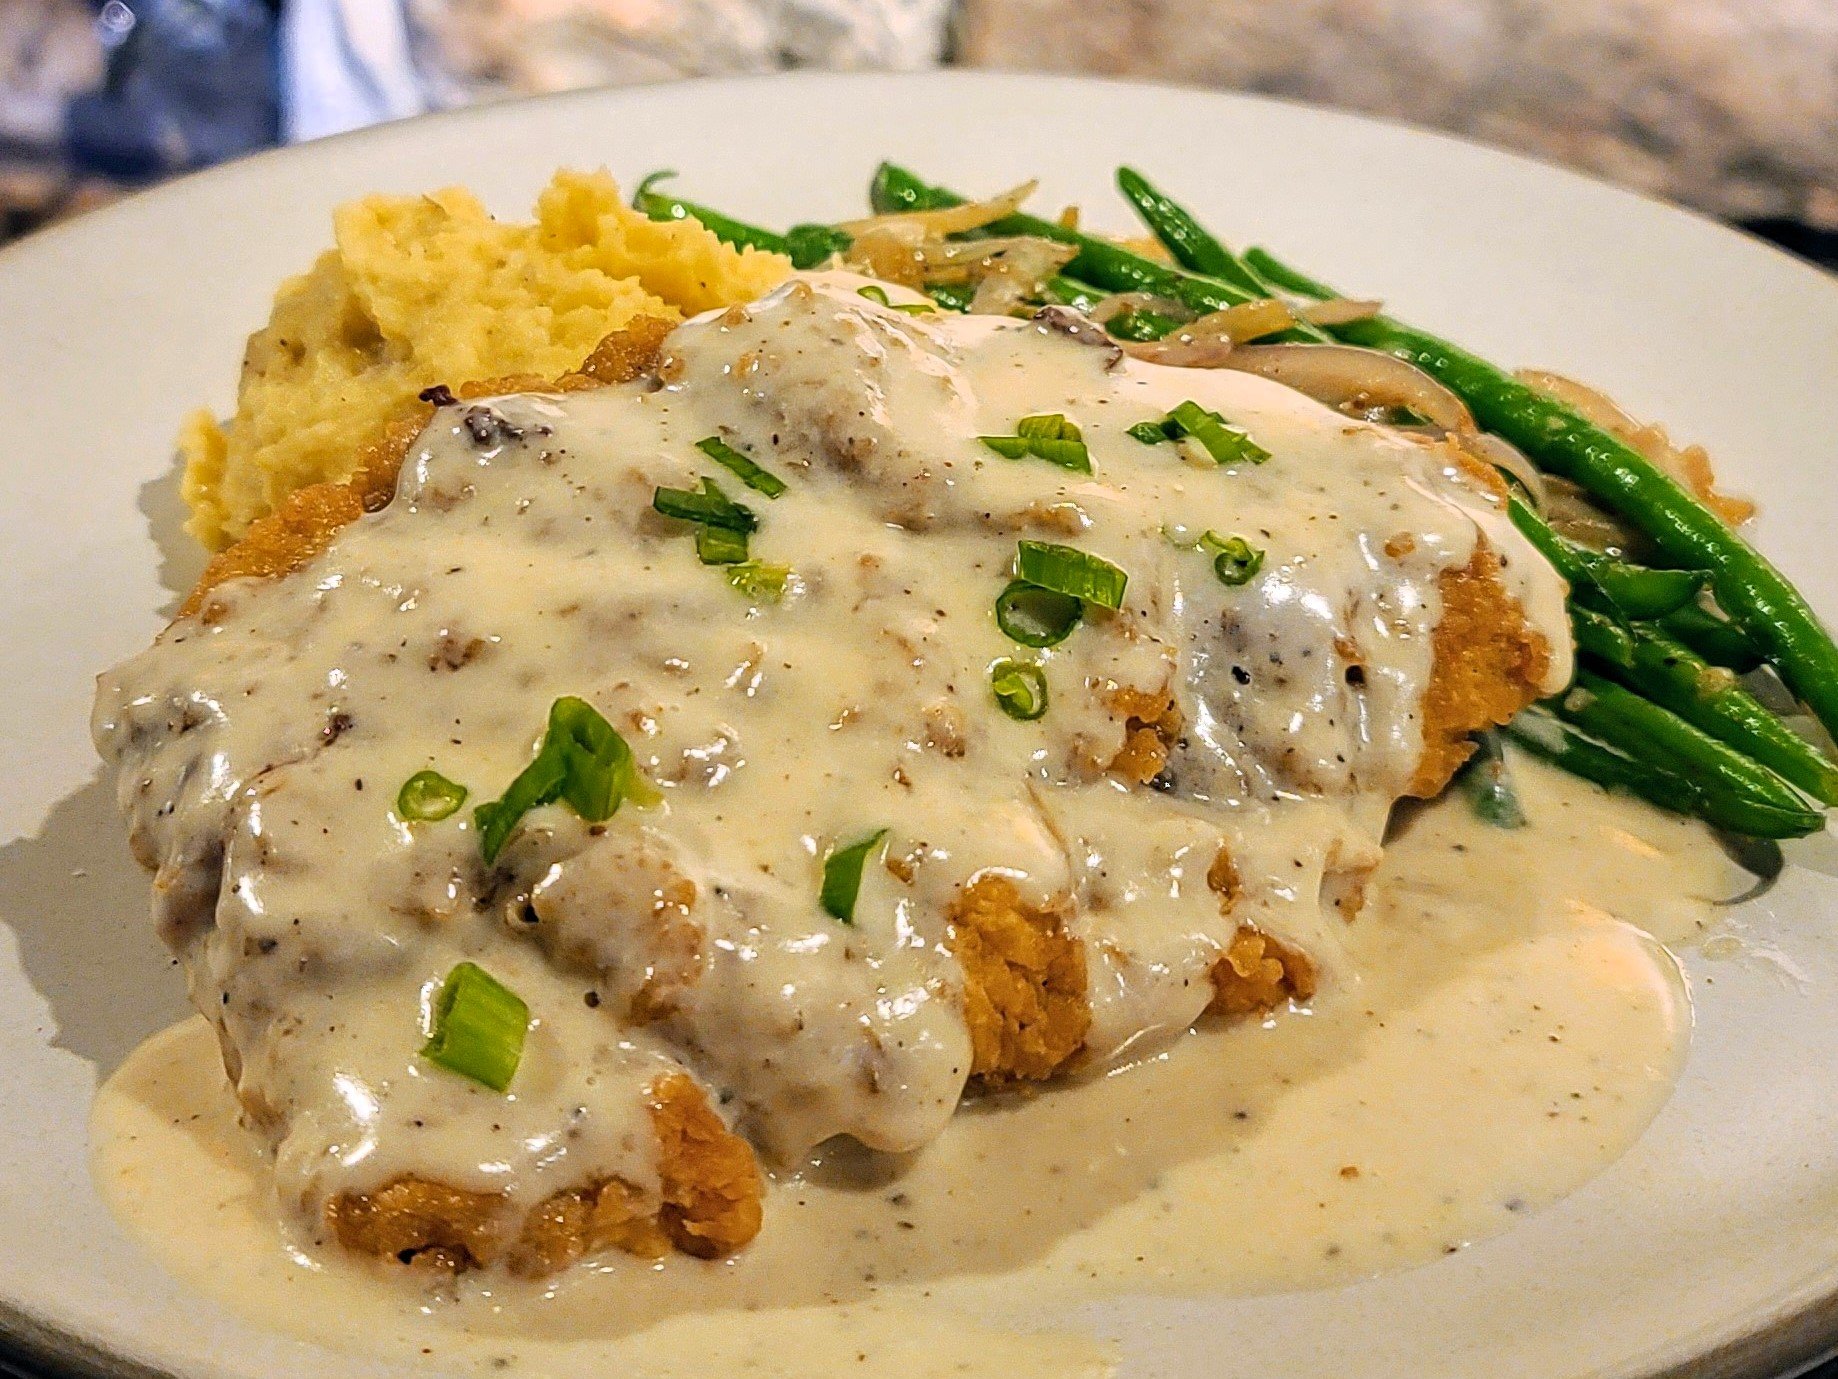 Your patience will be rewarded. First Sunday means chicken-fried steak for #Sundaysupper! Served with French beans and buttery mashed potatoes, still only $15, this Sunday after 4:00. Book your table or order to-go at rainbow-lodge.com.